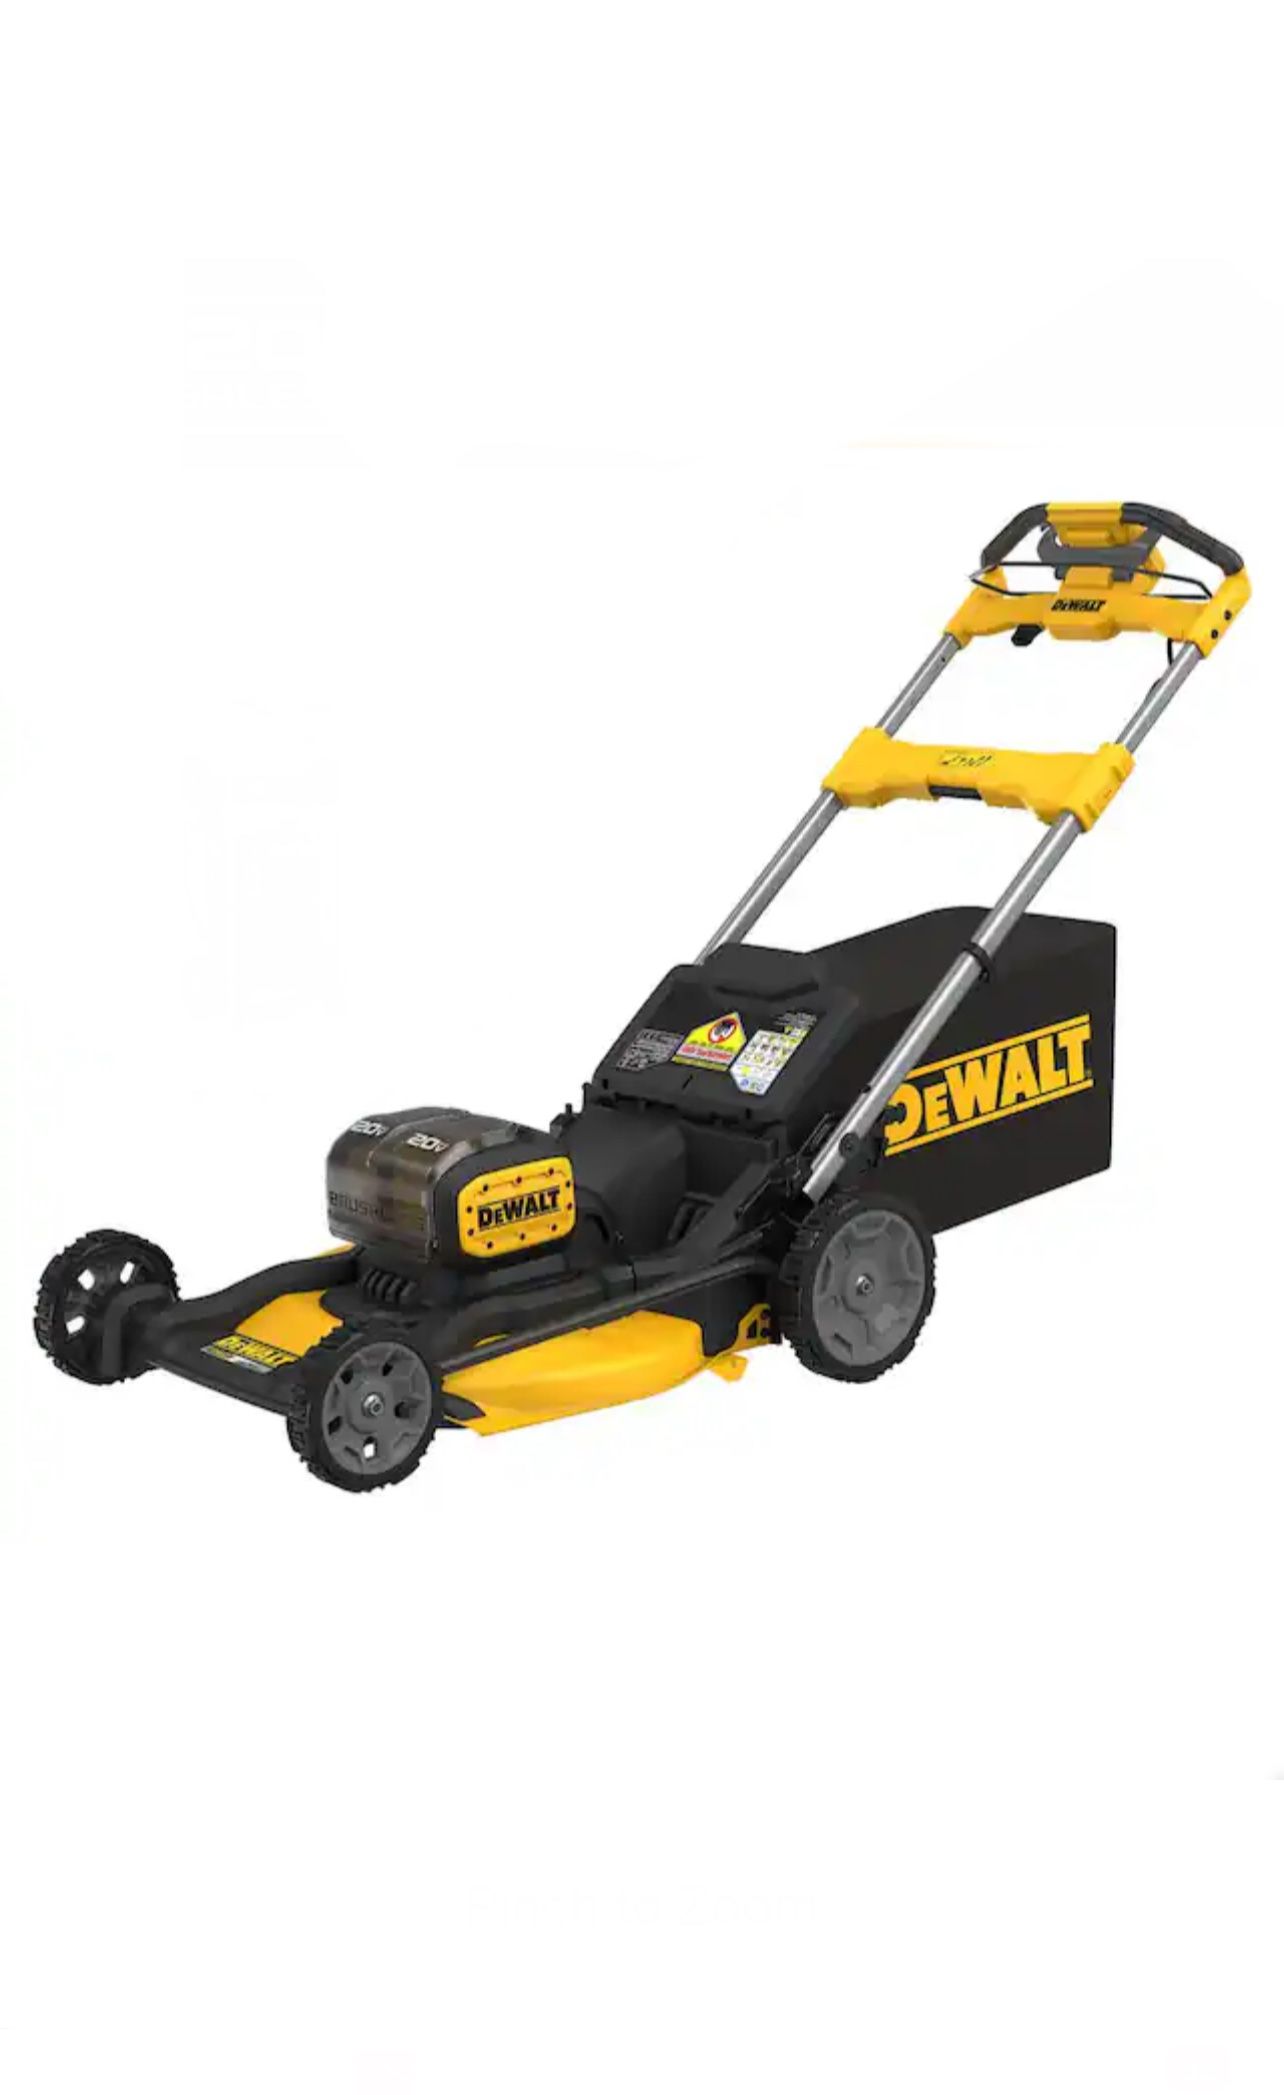 New DEWALT 20V MAX 21 in. Brushless Cordless Battery Powered Self Propelled Lawn Mower Tool Only $300 Firm